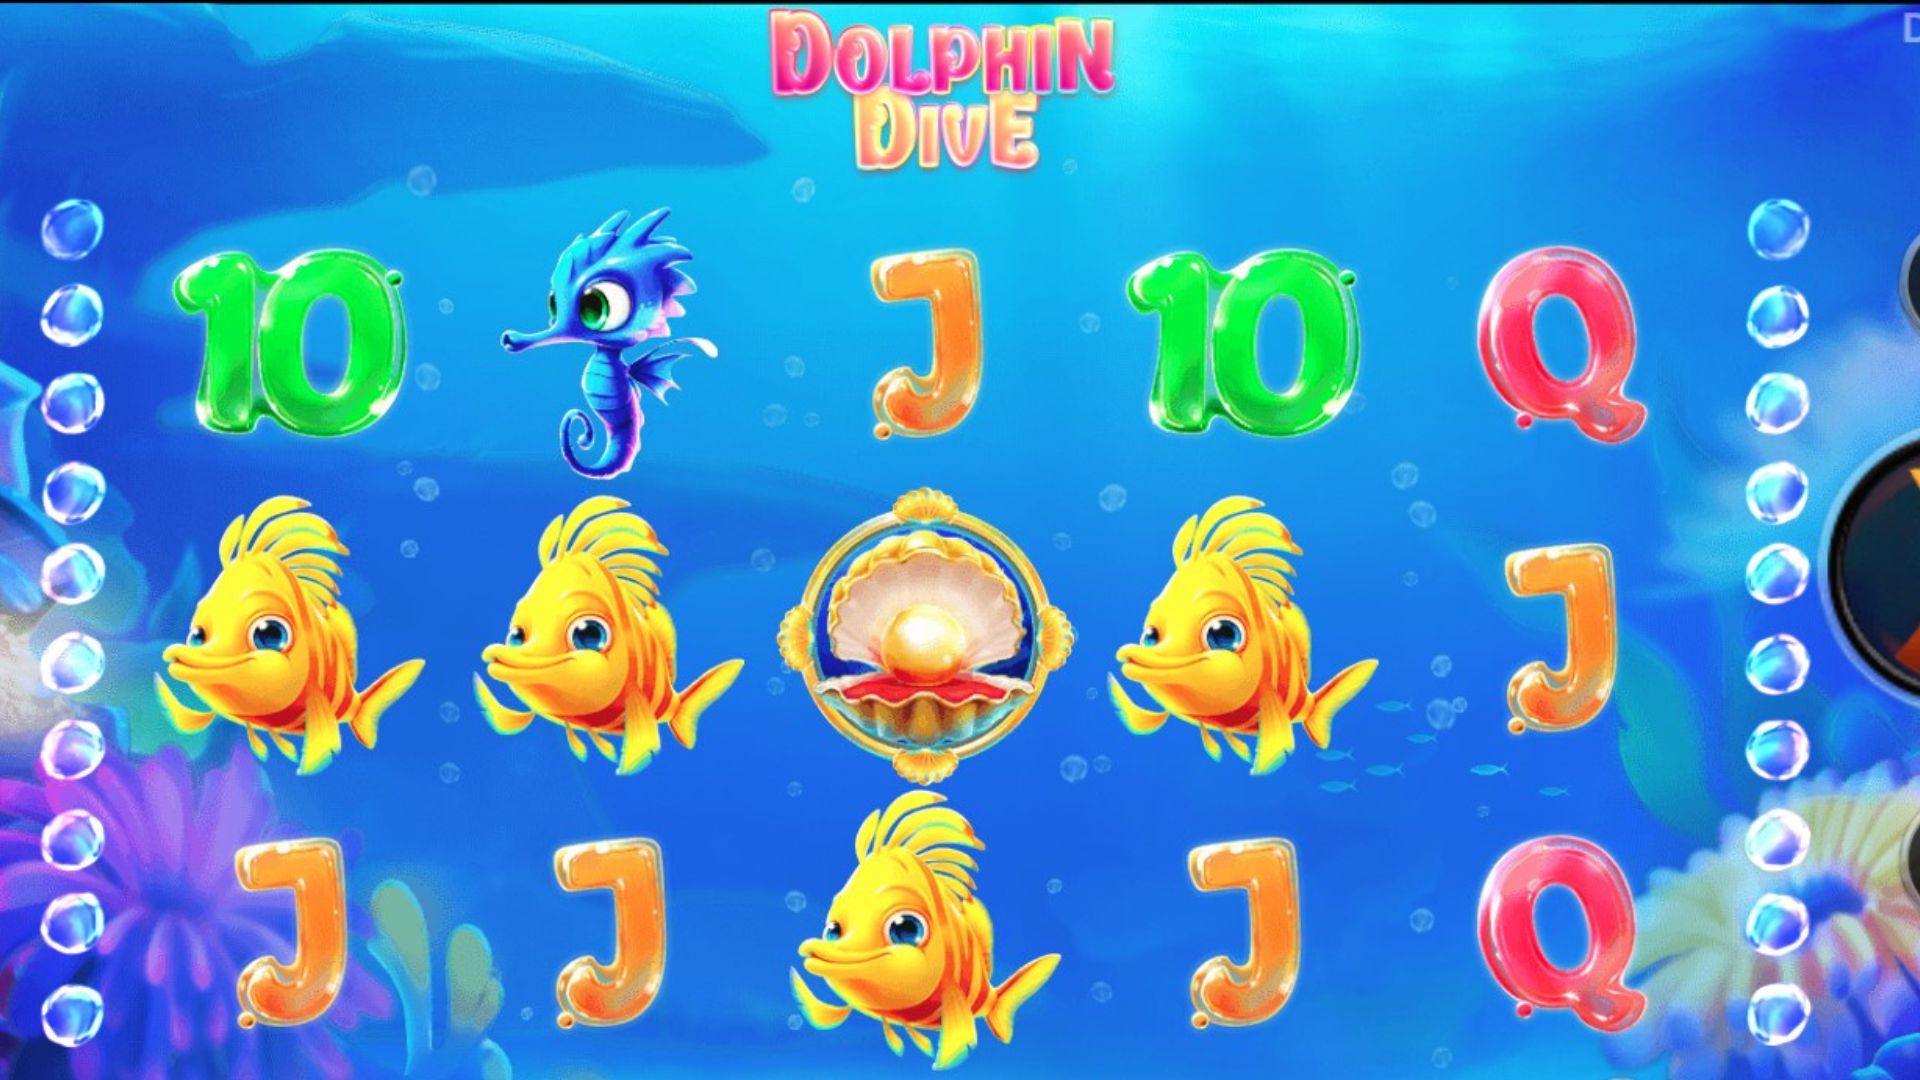 gameplay slot dolphin dive